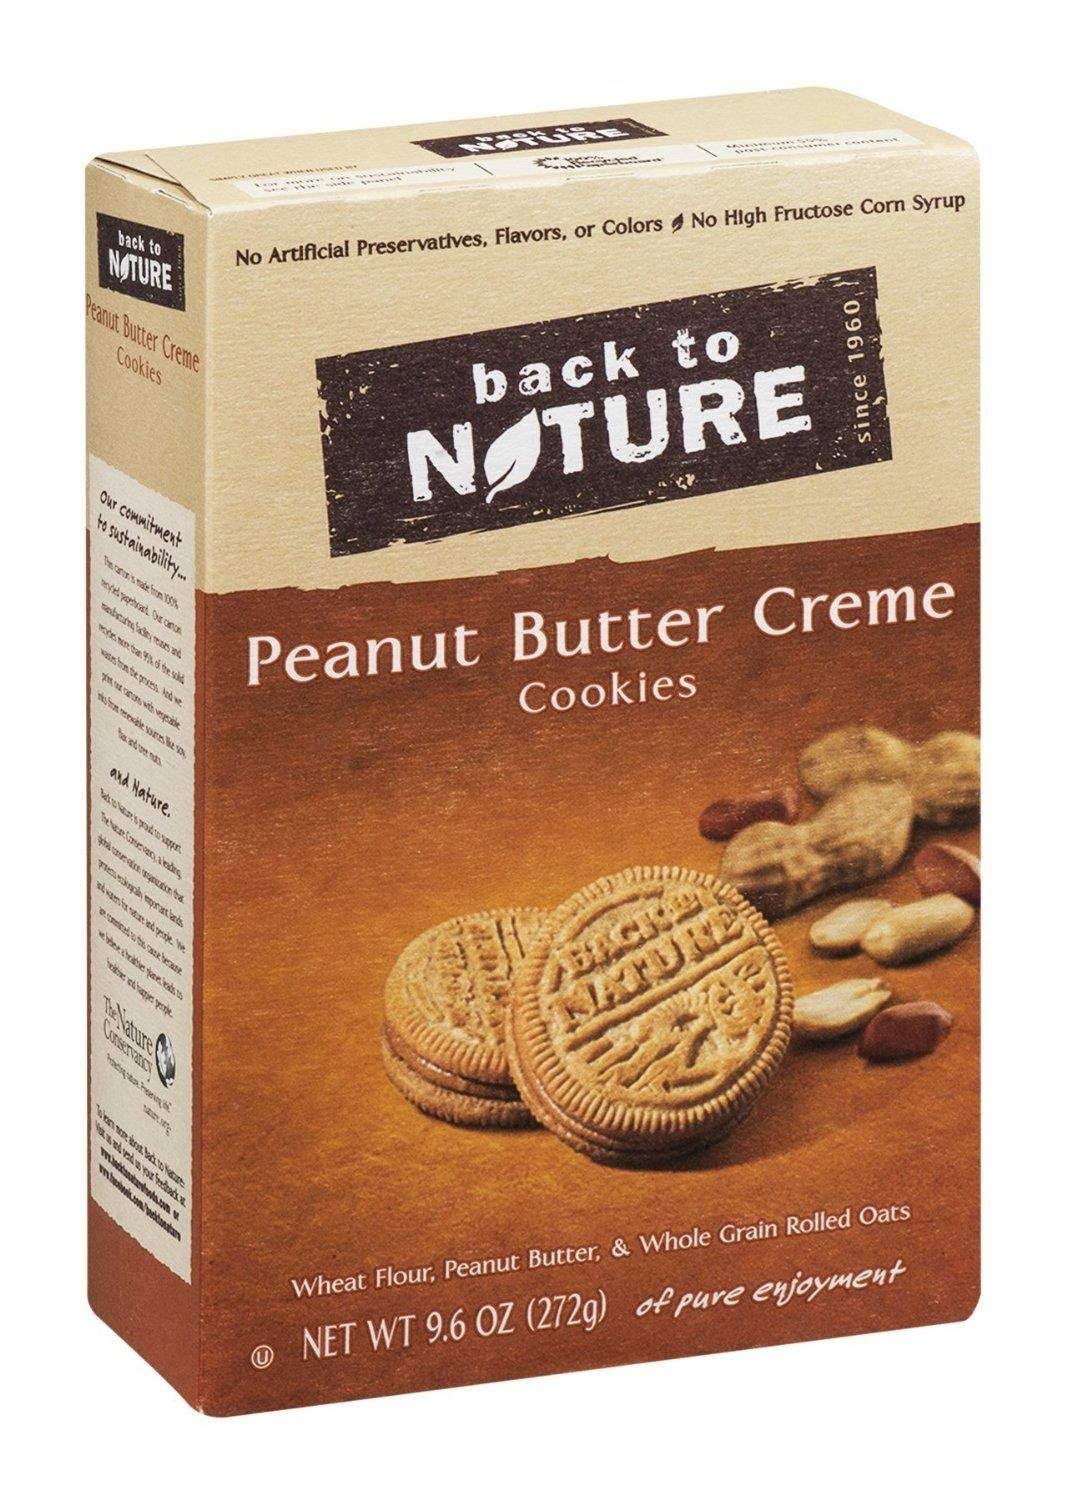 Back to Nature Peanut Butter Creme Cookies